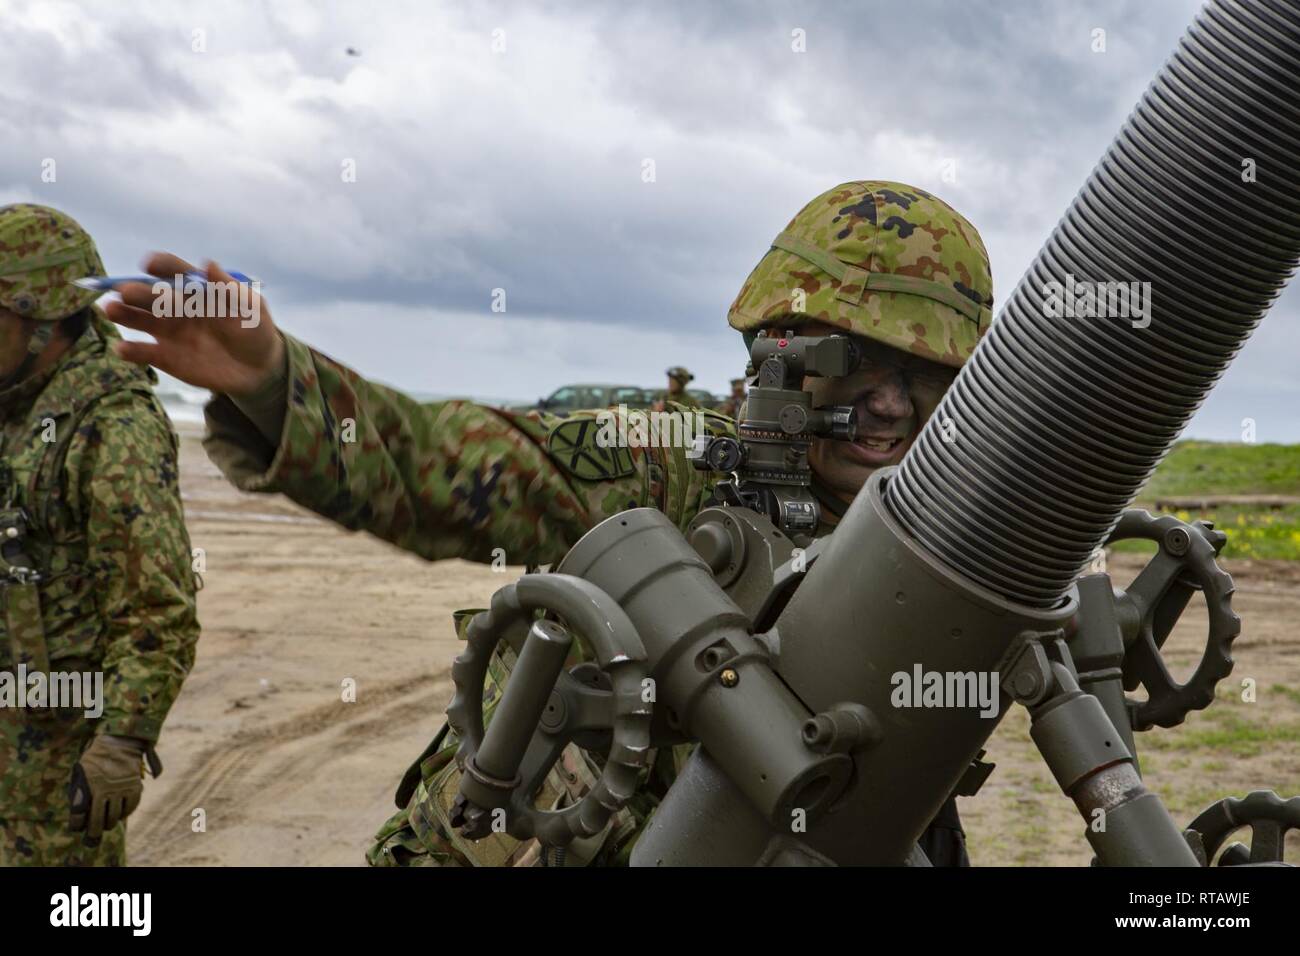 Japan Ground Self-Defense Force (JGSDF) Soldier checks the sights of a 120mm mortar during an amphibious landing exercise for Iron Fist 2019, Feb. 4, on U.S. Marine Corps Base Camp Pendleton, CA. Exercise Iron Fist is an annual, multilateral training exercise where U.S. and Japanese service members train together and share techniques, tactics and procedures to improve their combined operational capabilities. Stock Photo